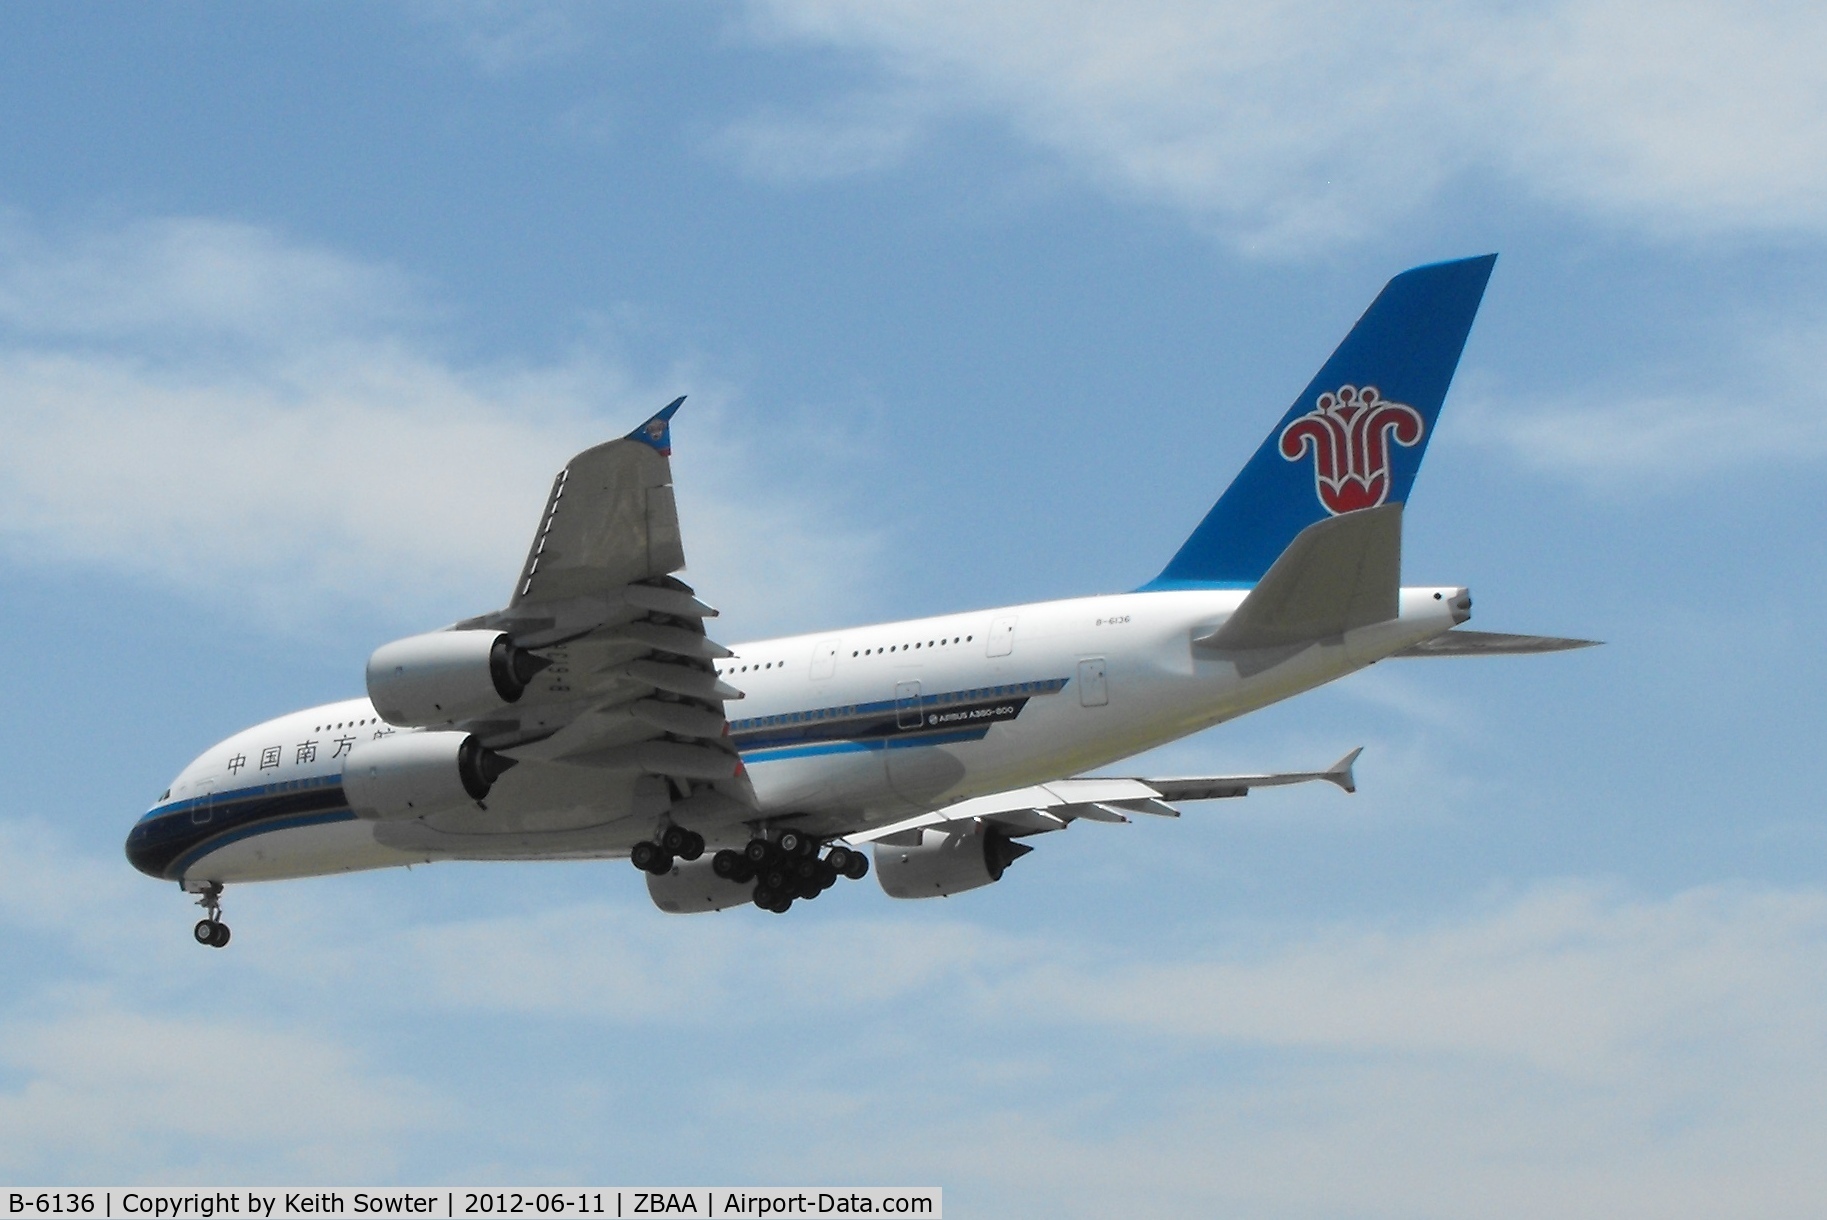 B-6136, 2011 Airbus A380-841 C/N 031, Short finals to land